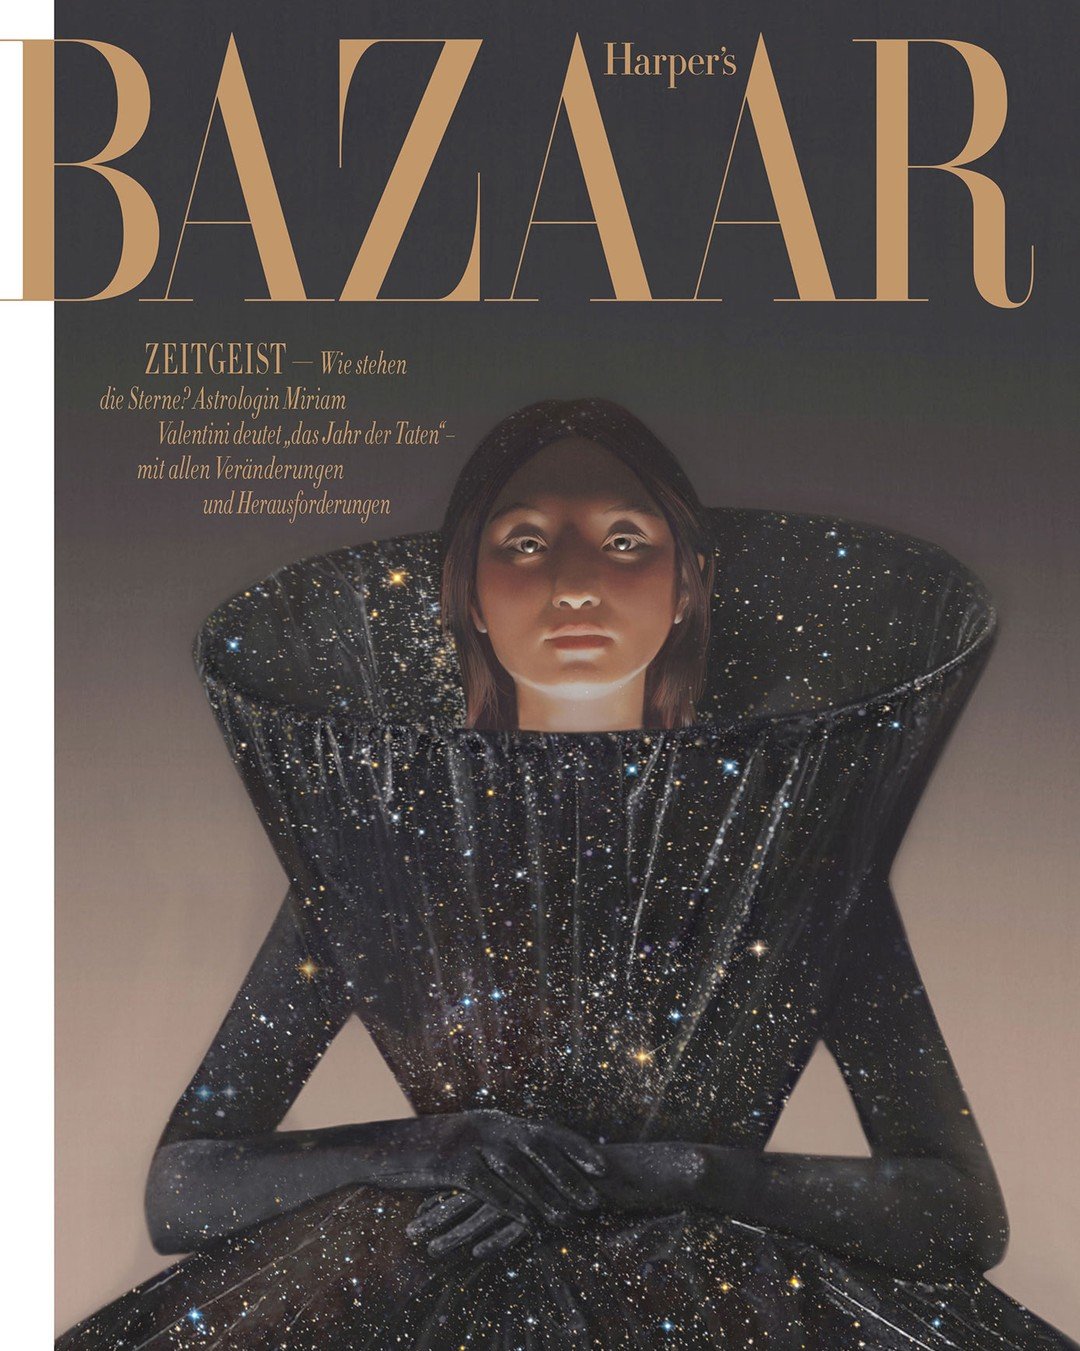 Gorgeous cover art by @hsiaoroncheng for Harpers Bazaar Magazine.

Hsiao's portfolio - dutchuncle.co.uk/hsiao-ron-cheng